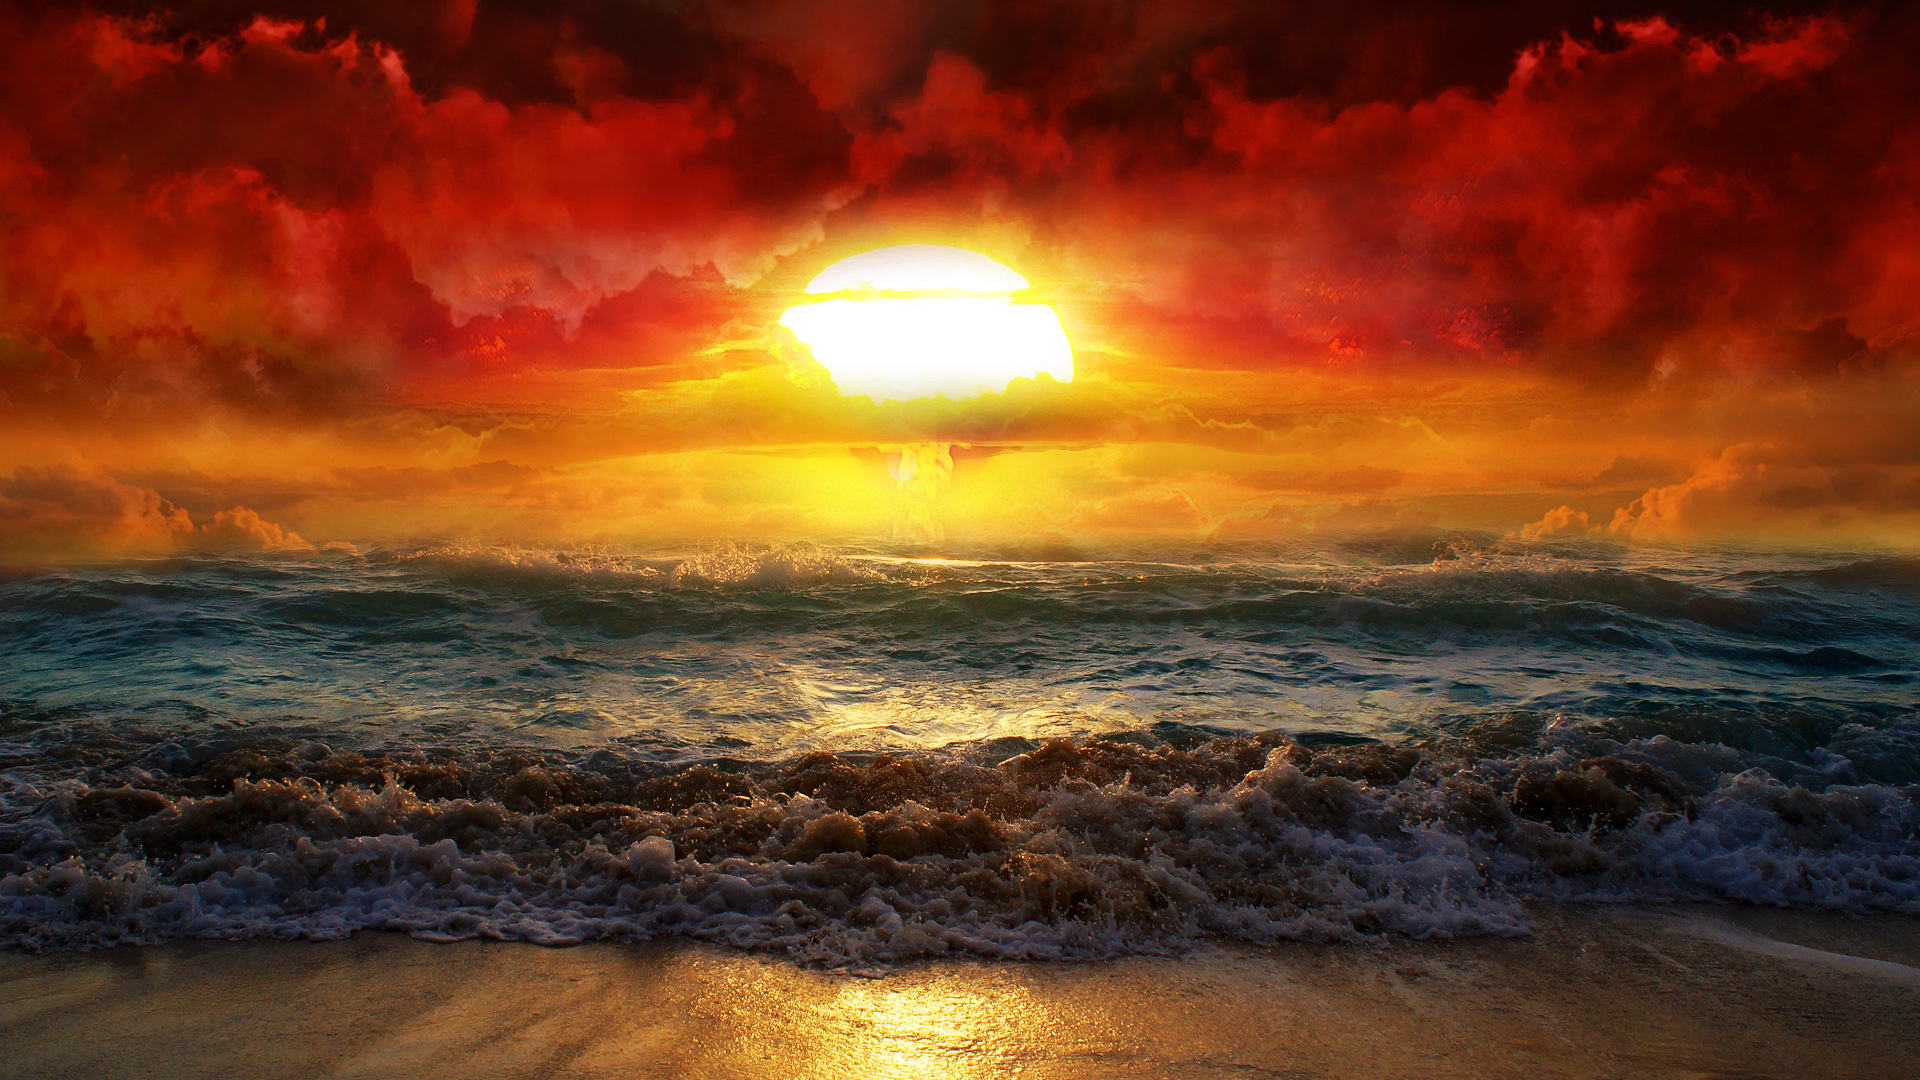 The Sunrise Wallpapers HD Wallpapers 1920x1080